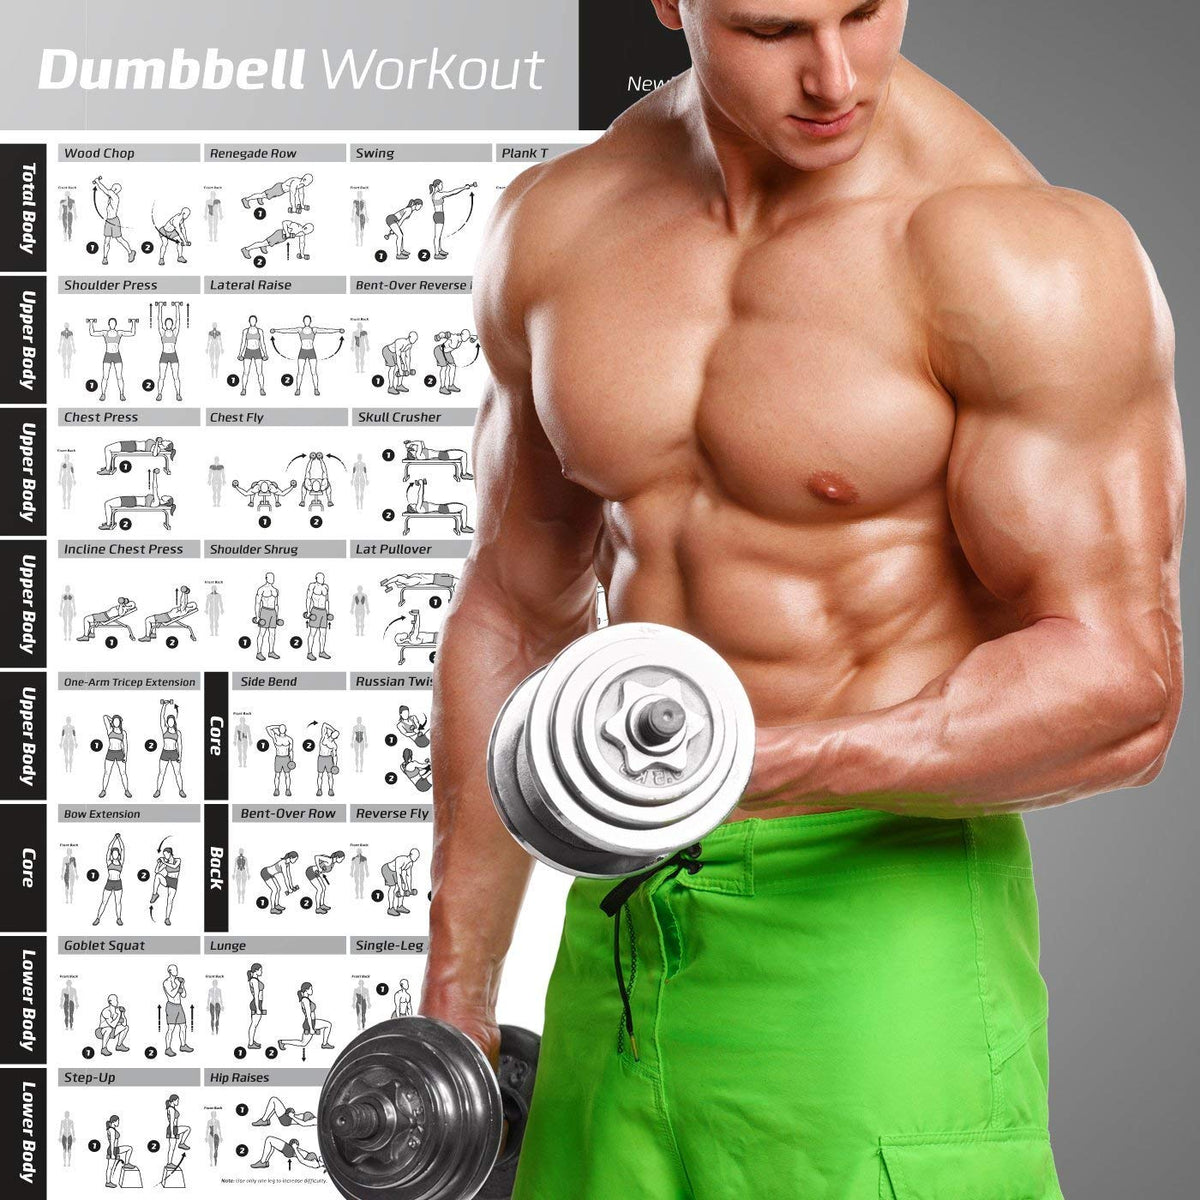 POSTER PRINT GIANT SPORT PHOTO EQUIPMENT EXERCISE WEIGHT DUMBELL FITNESS PAMP258